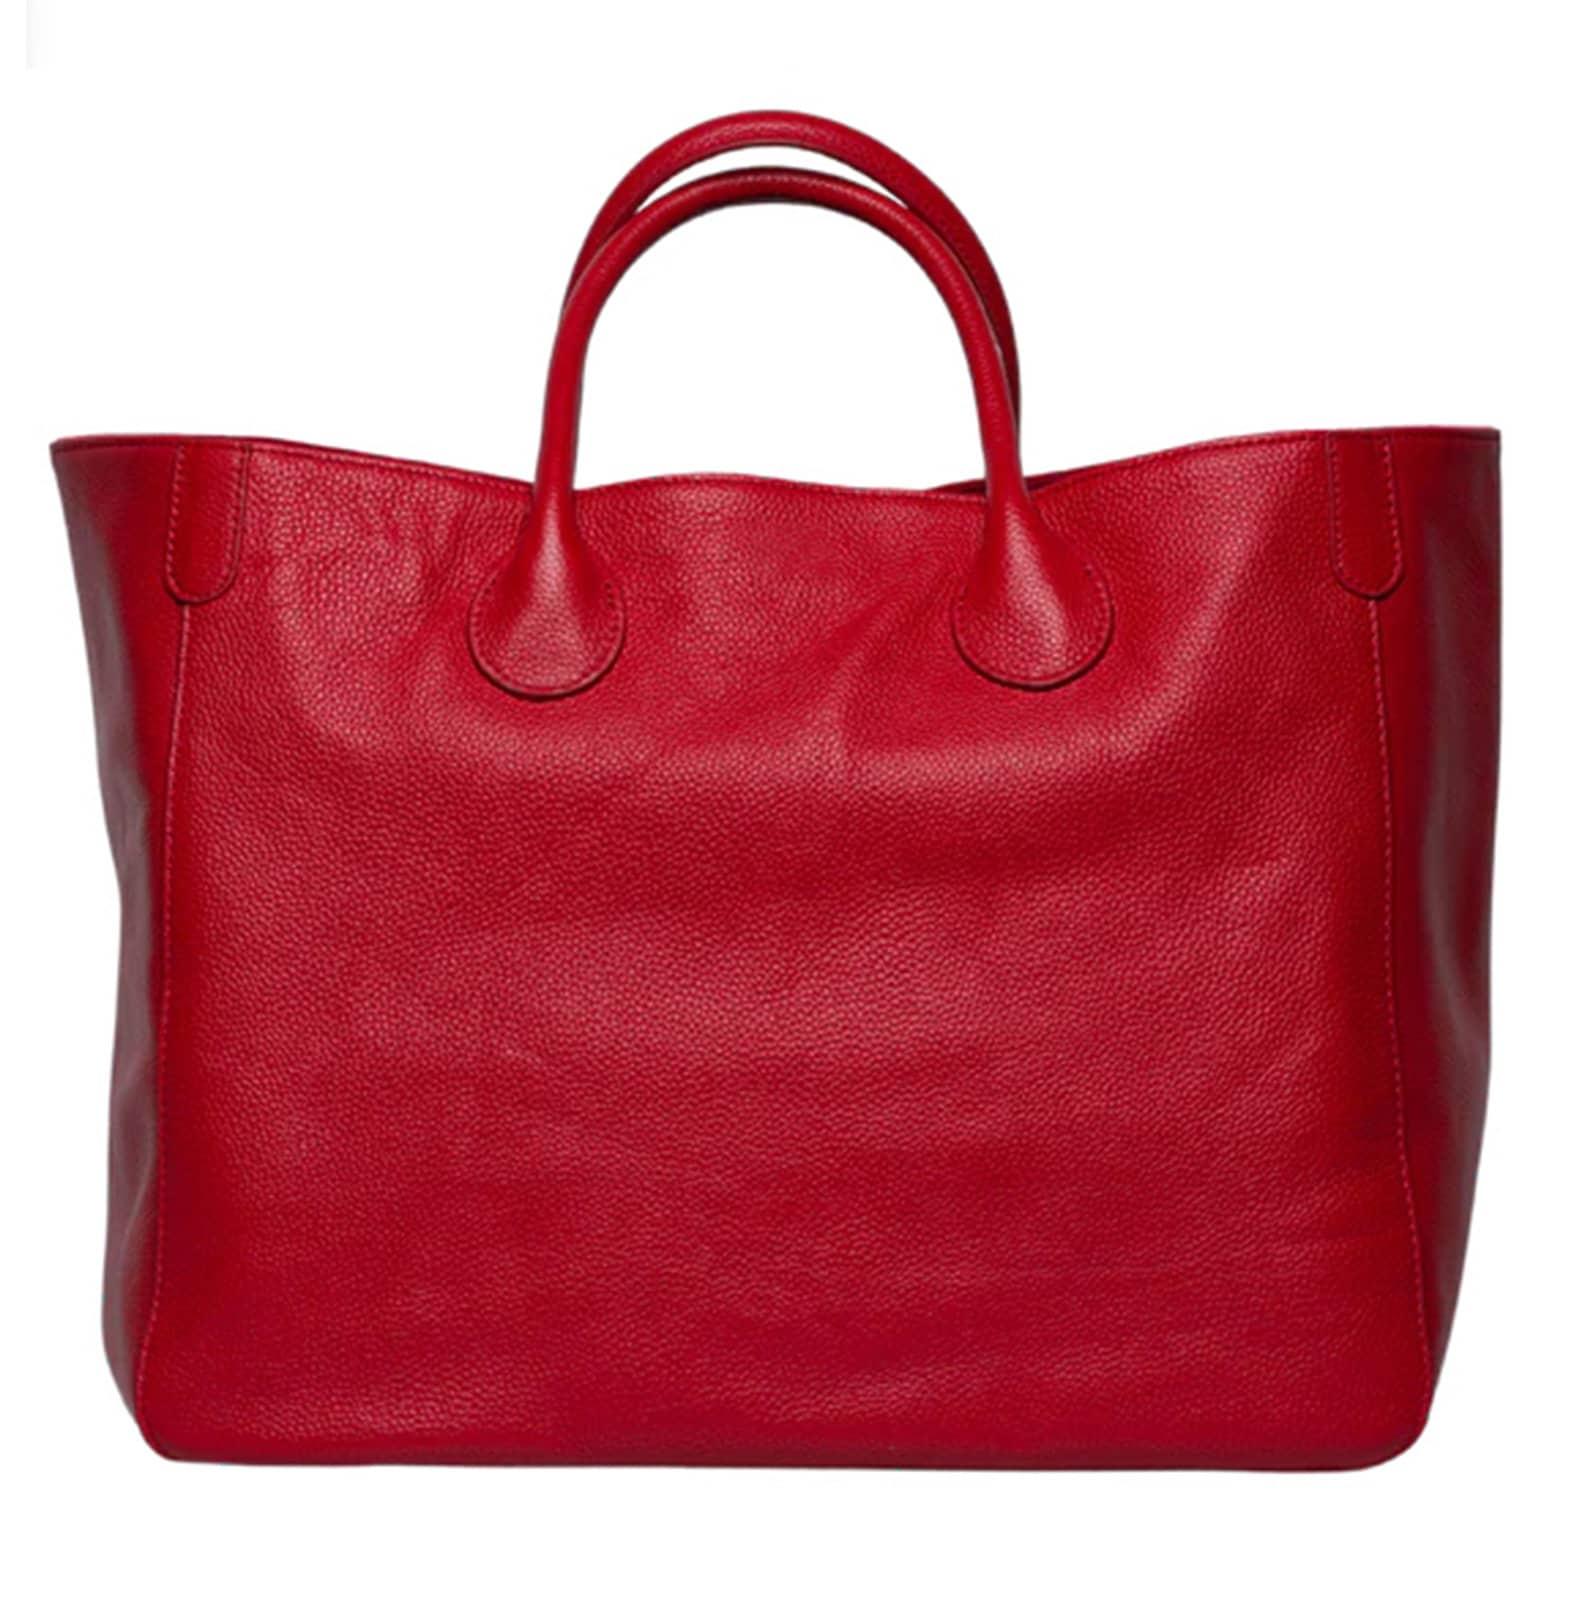 Oversize Large Leather Tote Bag, Cowhide Leather Bag, Lady Fashion Bag Bright Red, Weekend Bag, Working Bag, Personalized gifts